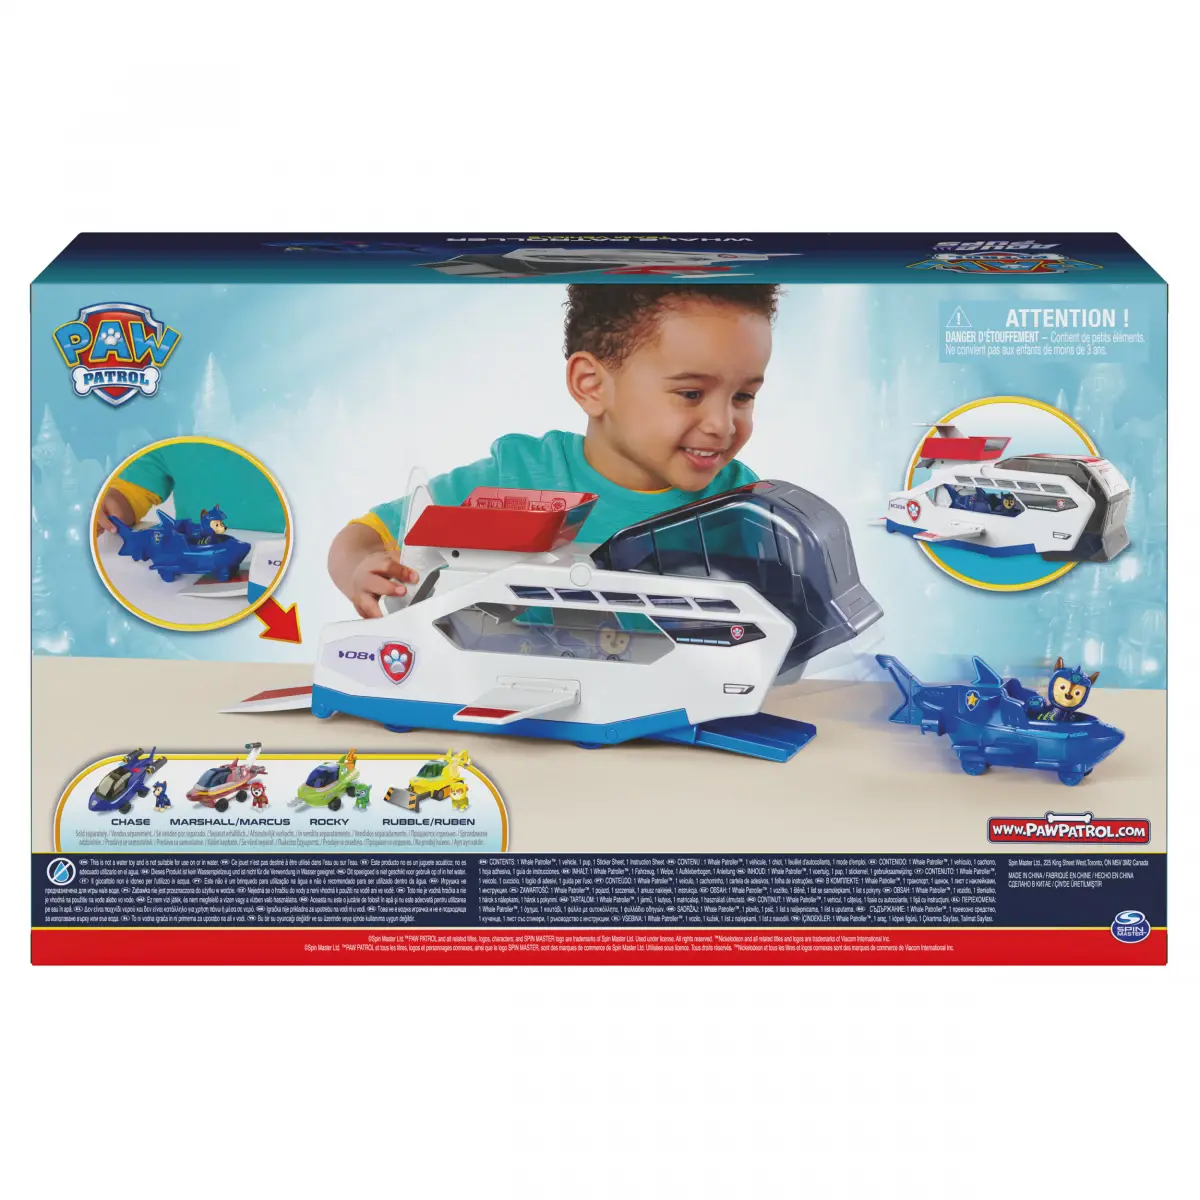 Paw Patrol Aqua Pups Whale Patroller Team Vehicle With Chase Action Figure, Toy Car And Vehicle Launcher, Kids Toys For Ages 3 And Up